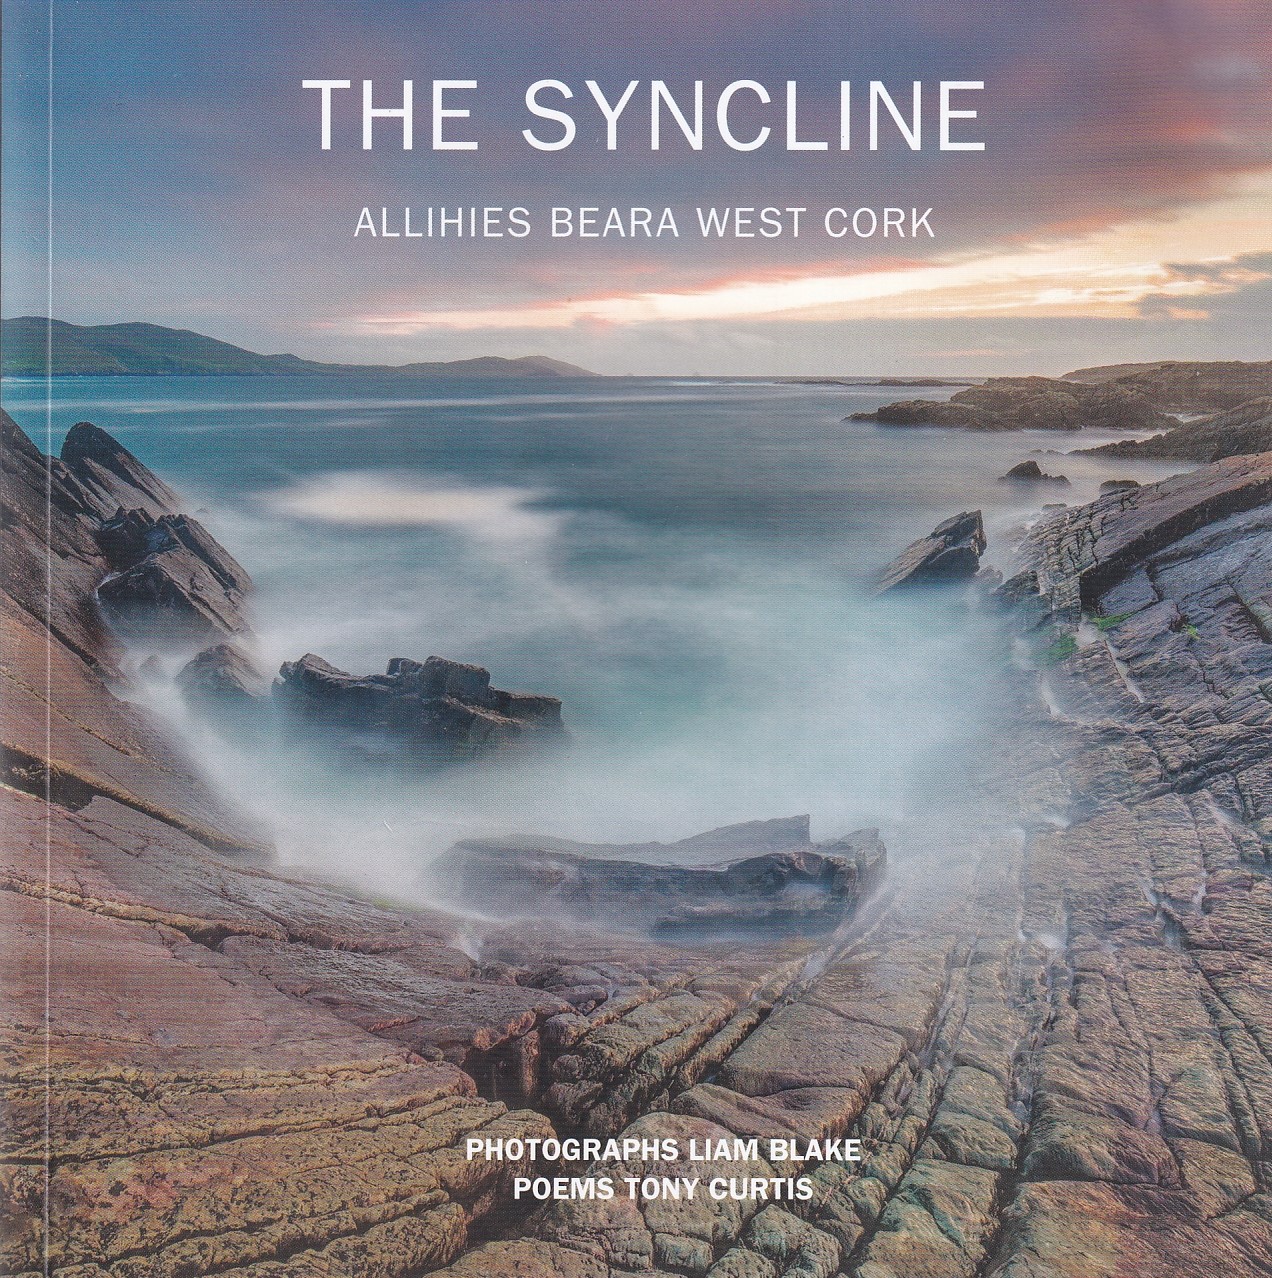 The Syncline: Allihies Beara West Cork [SIGNED] by Liam Blake & Tony Curtis